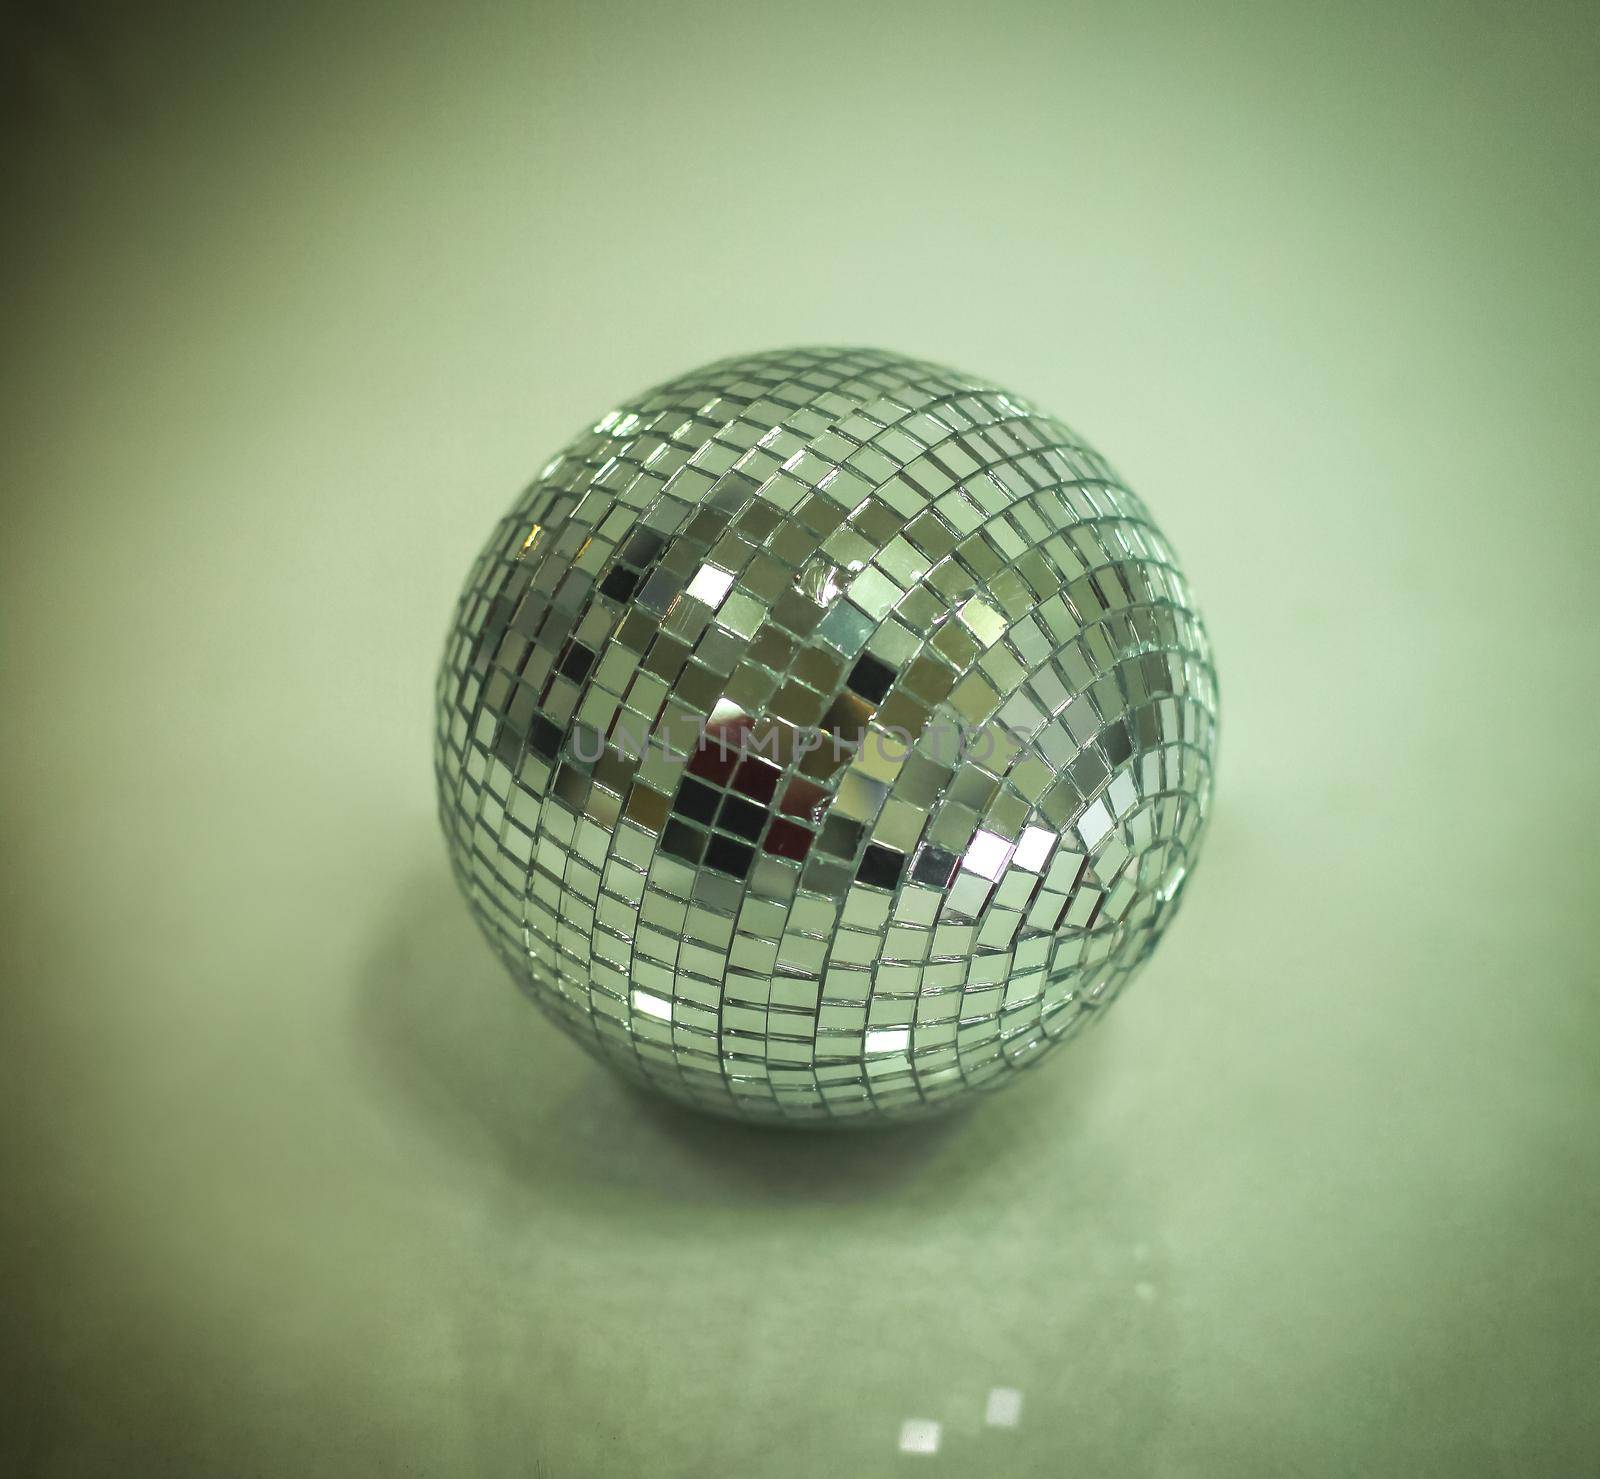 mirror ball.isolated on a dark background.photo with copy space